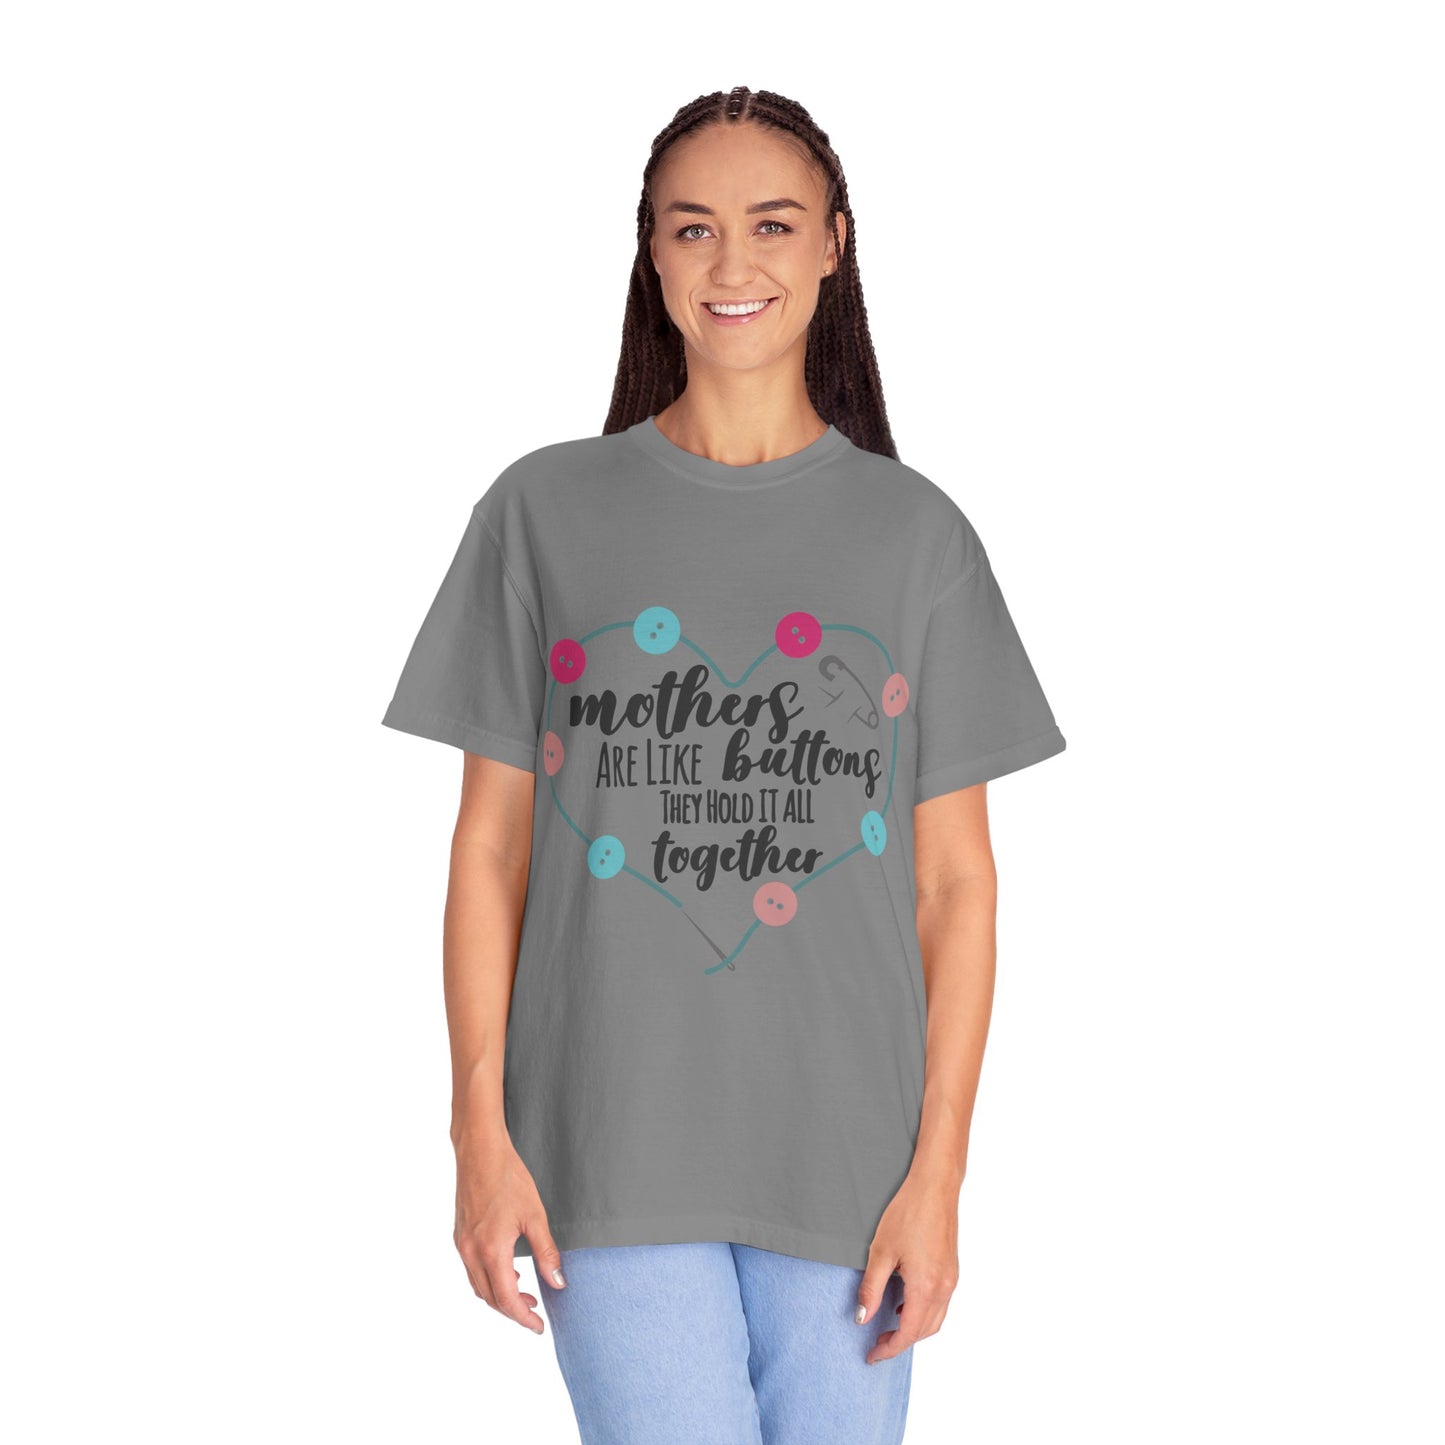 Mother is like a button - Unisex Garment-Dyed T-shirt